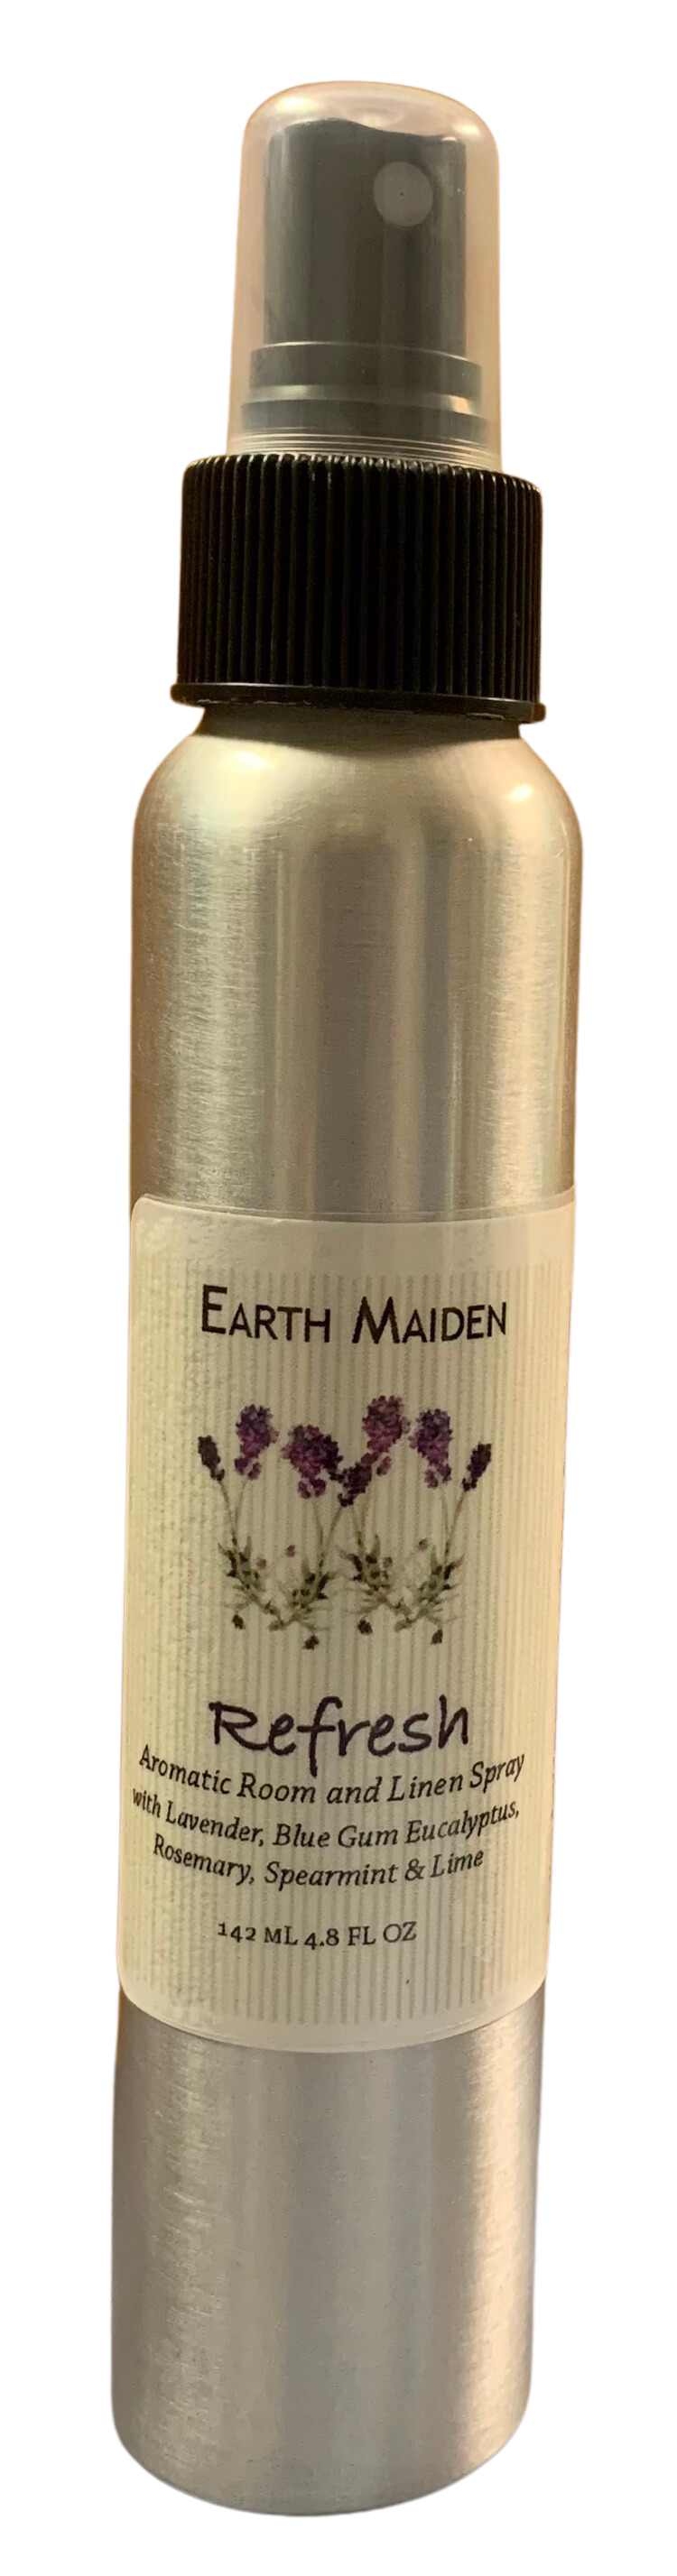 All Natural Refresh Aroma Mist with Lavender, Eucalyptus, Rosemary, Spearmint and Lime Essential Oils in 5 ounce metal bullet container with fine mist sprayer.